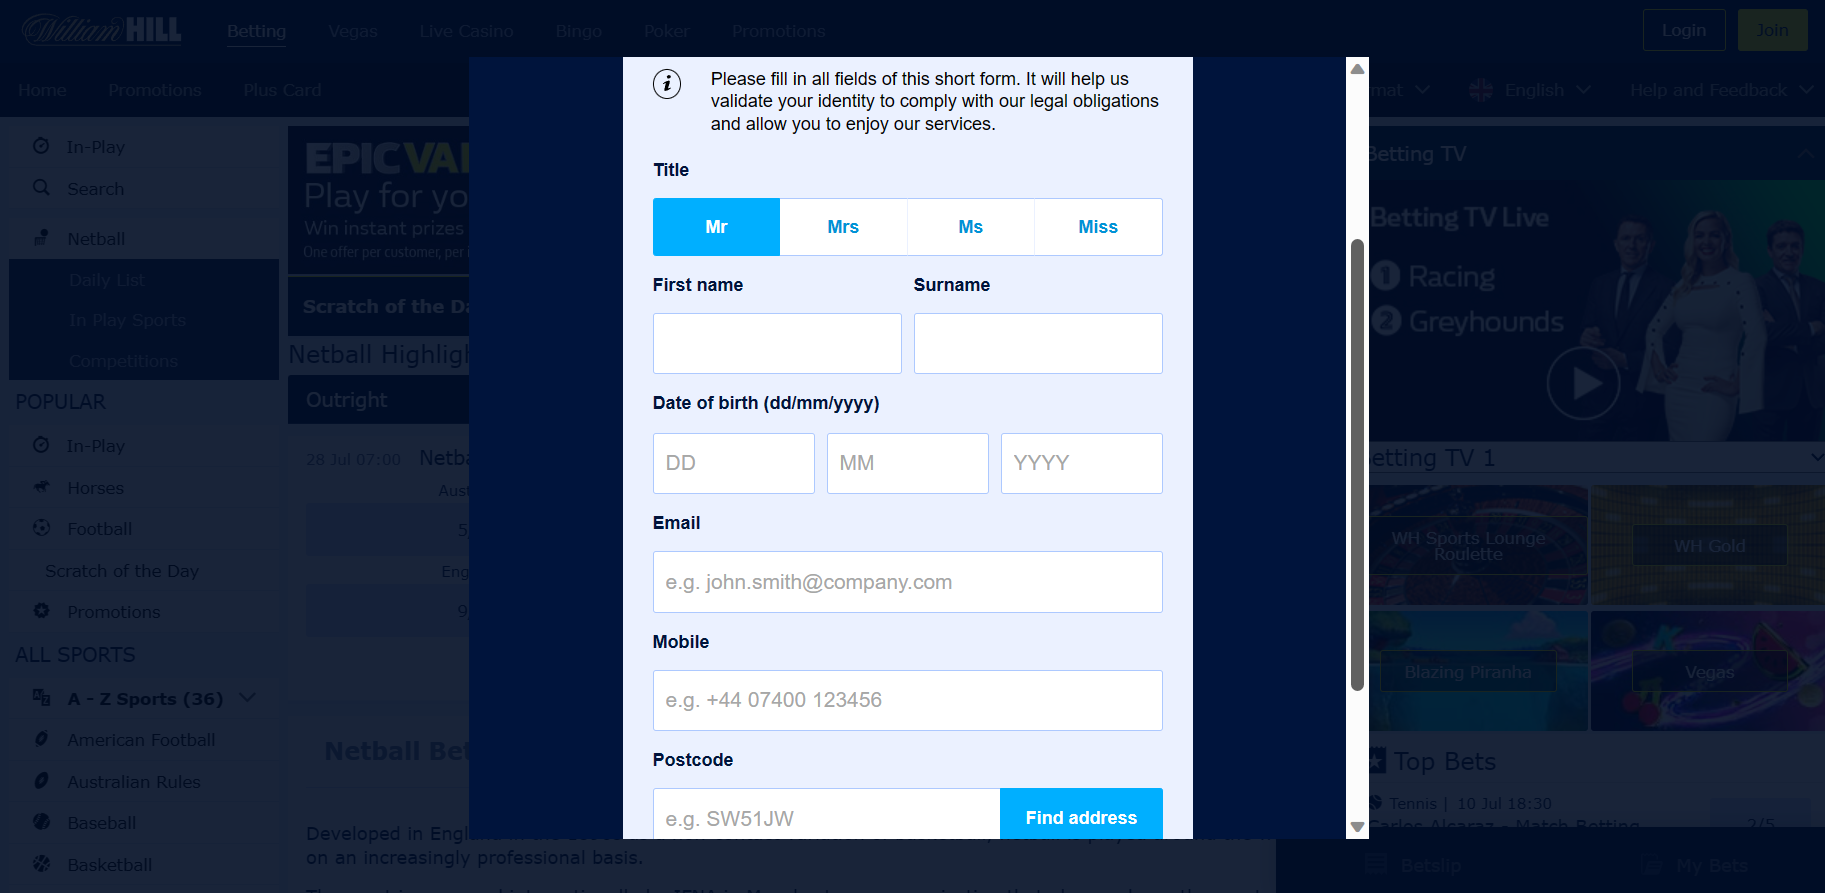 William Hill sign up form